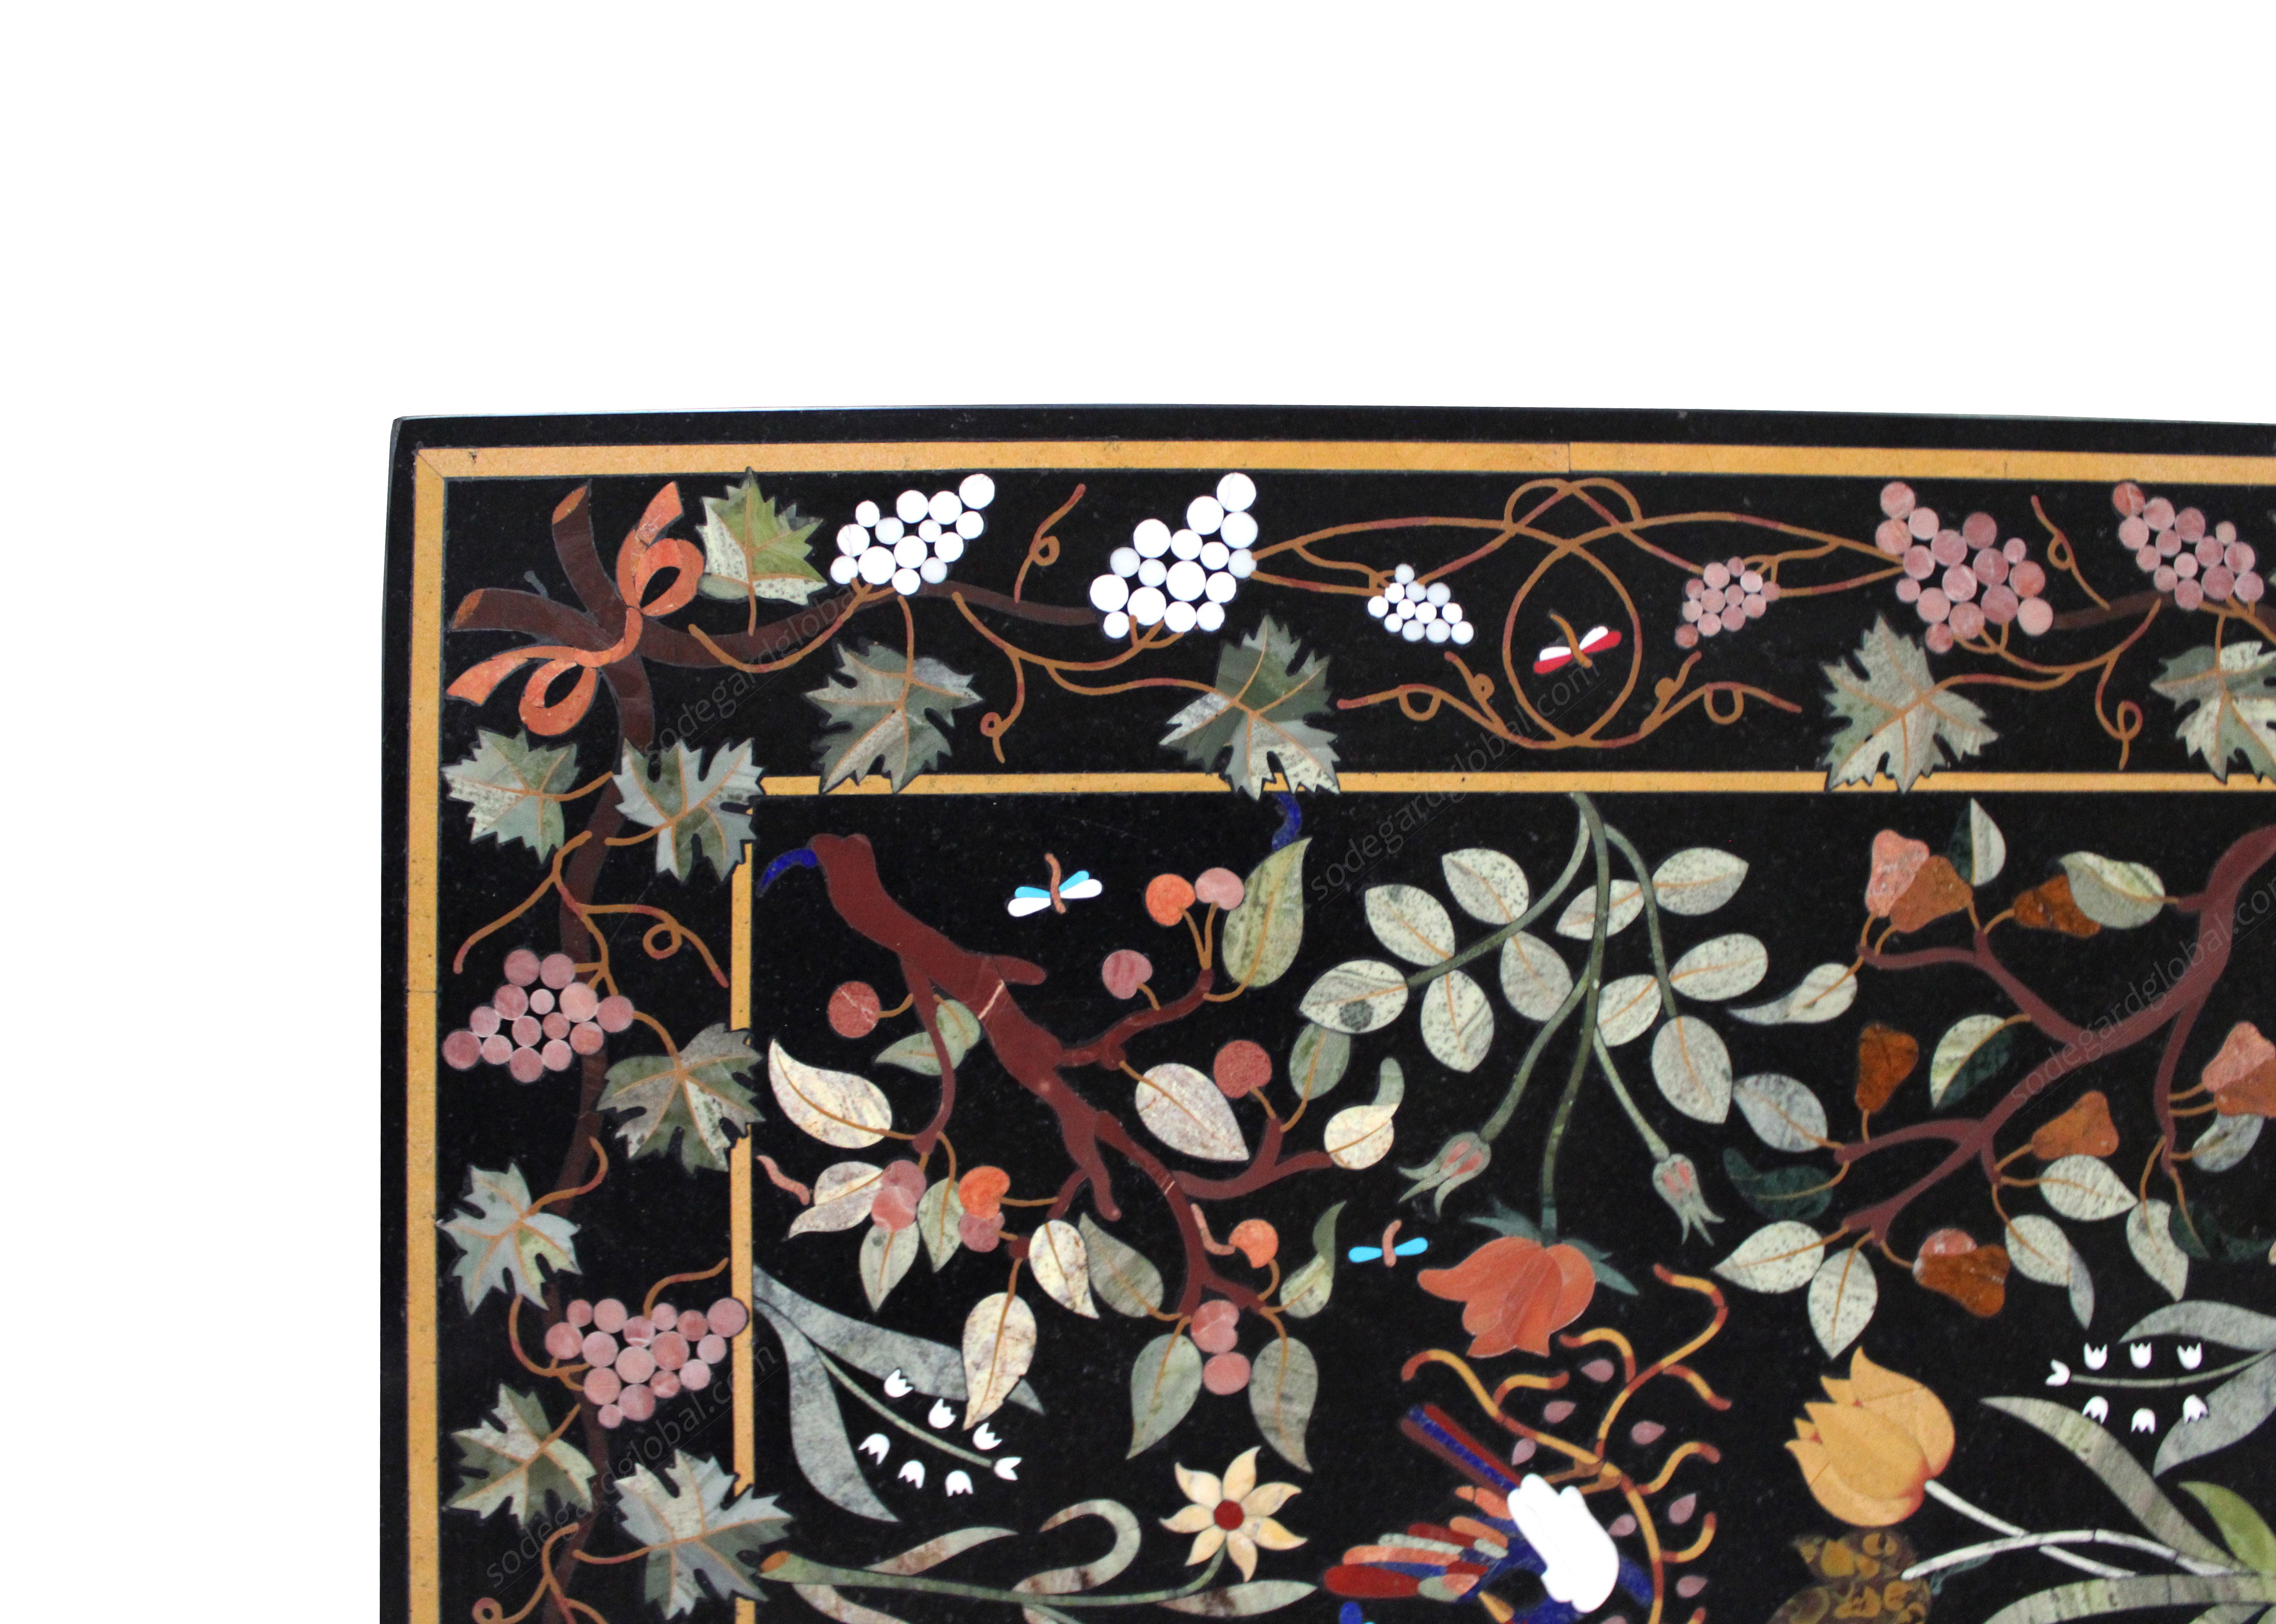 This stunning coffee table top exhibits one of the most intricate Italian Pietra Dura design. The rich compositaion uses more than 20 different semi-precious stones inlaid over the black marble back ground using the centuries old techniques of